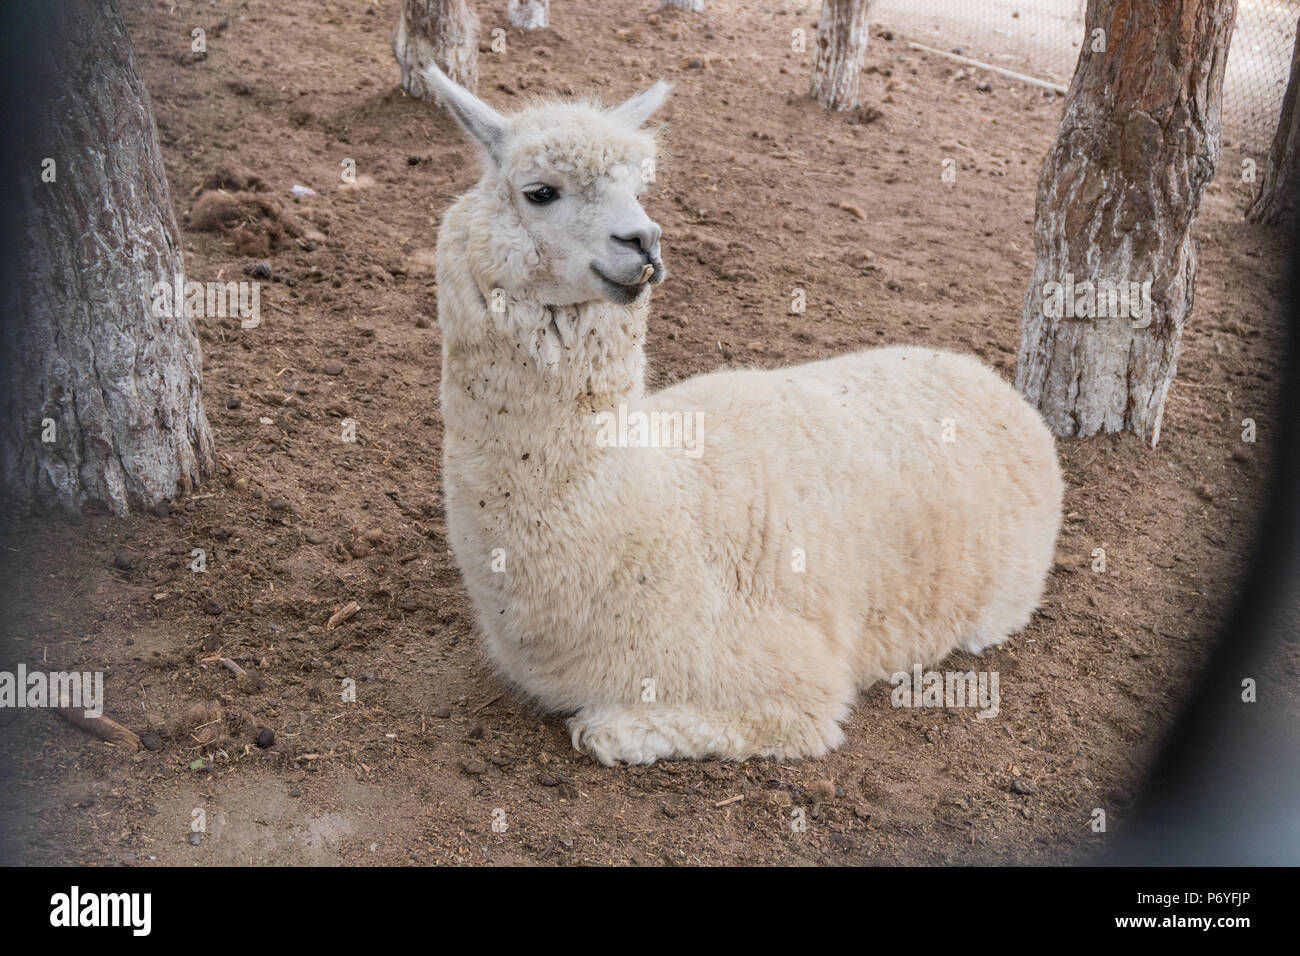 A small white lama relaxes lying on the ground Stock Photo